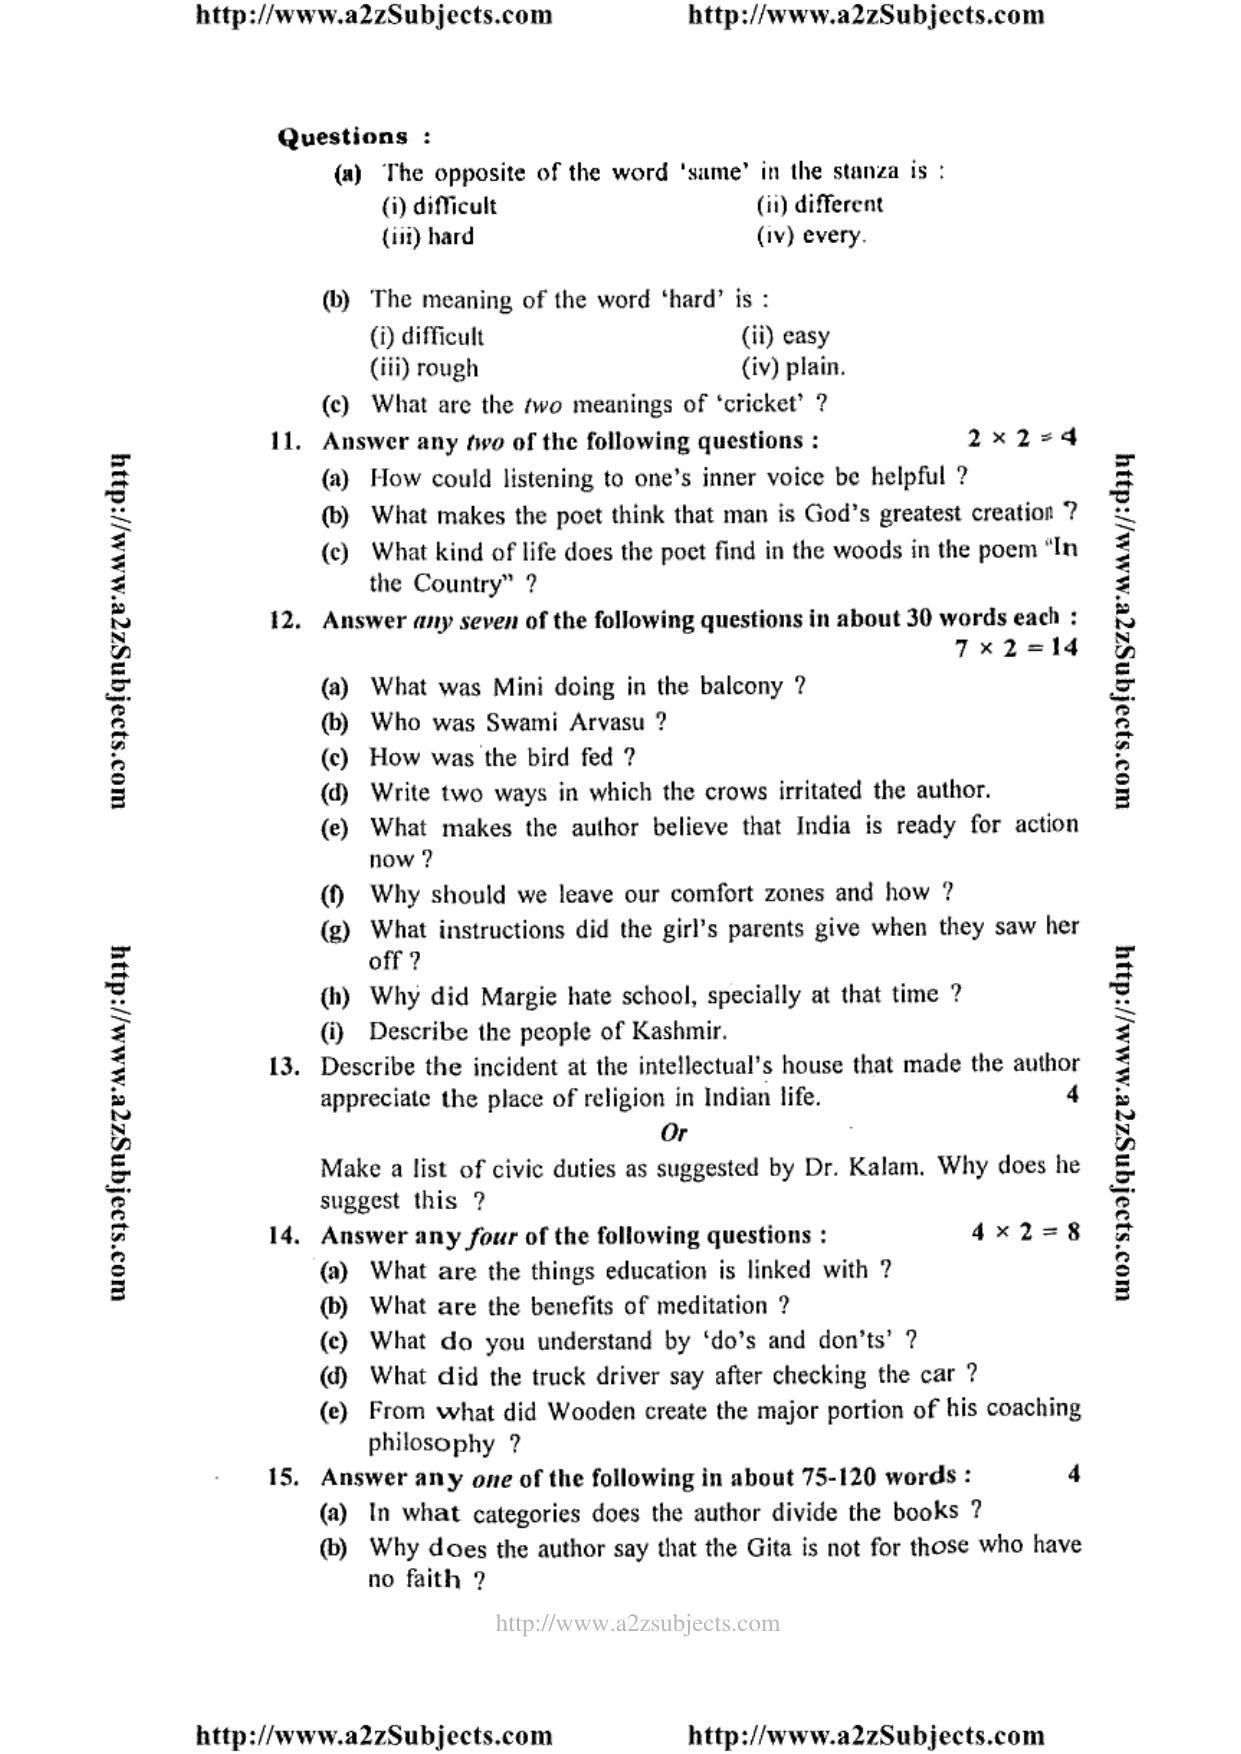 MP Board Class 12 English General 2014 Question Paper - Page 5